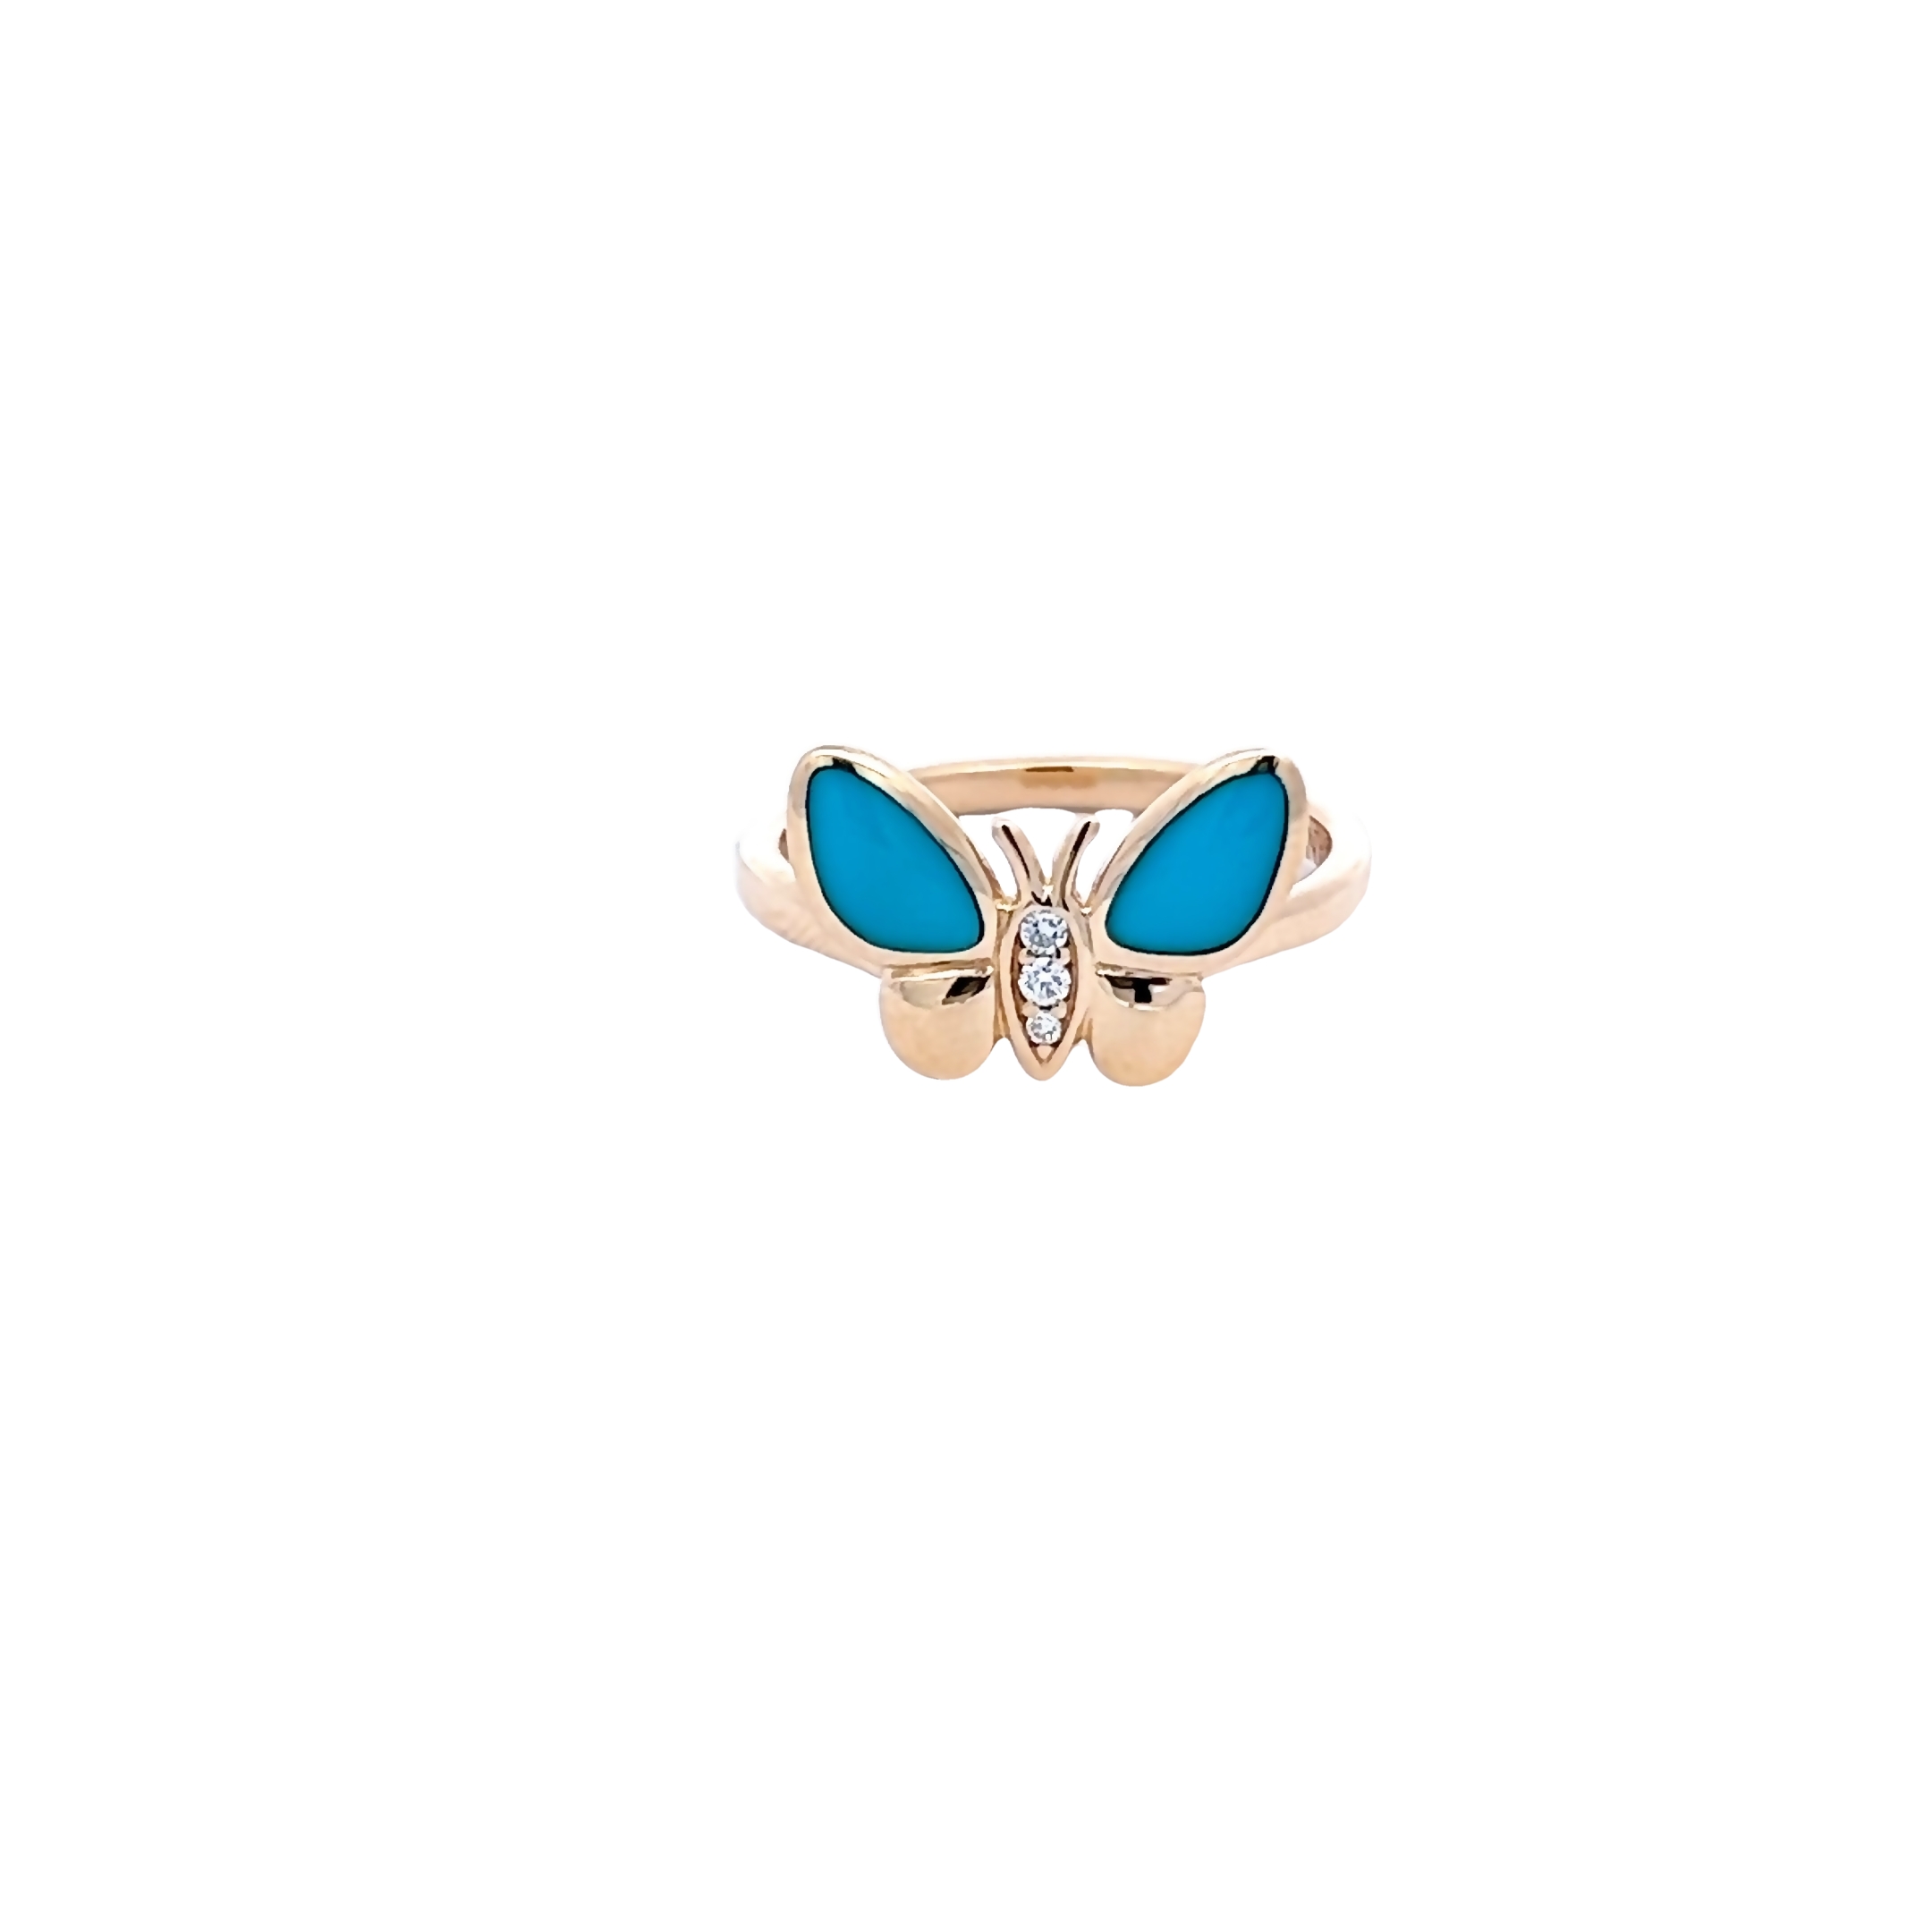 14 Karat yellow gold butterfly ring with 3=0.03 total weight round brilliant G VS Diamonds and Sleeping BeautyTurquoise inlay. Size 7